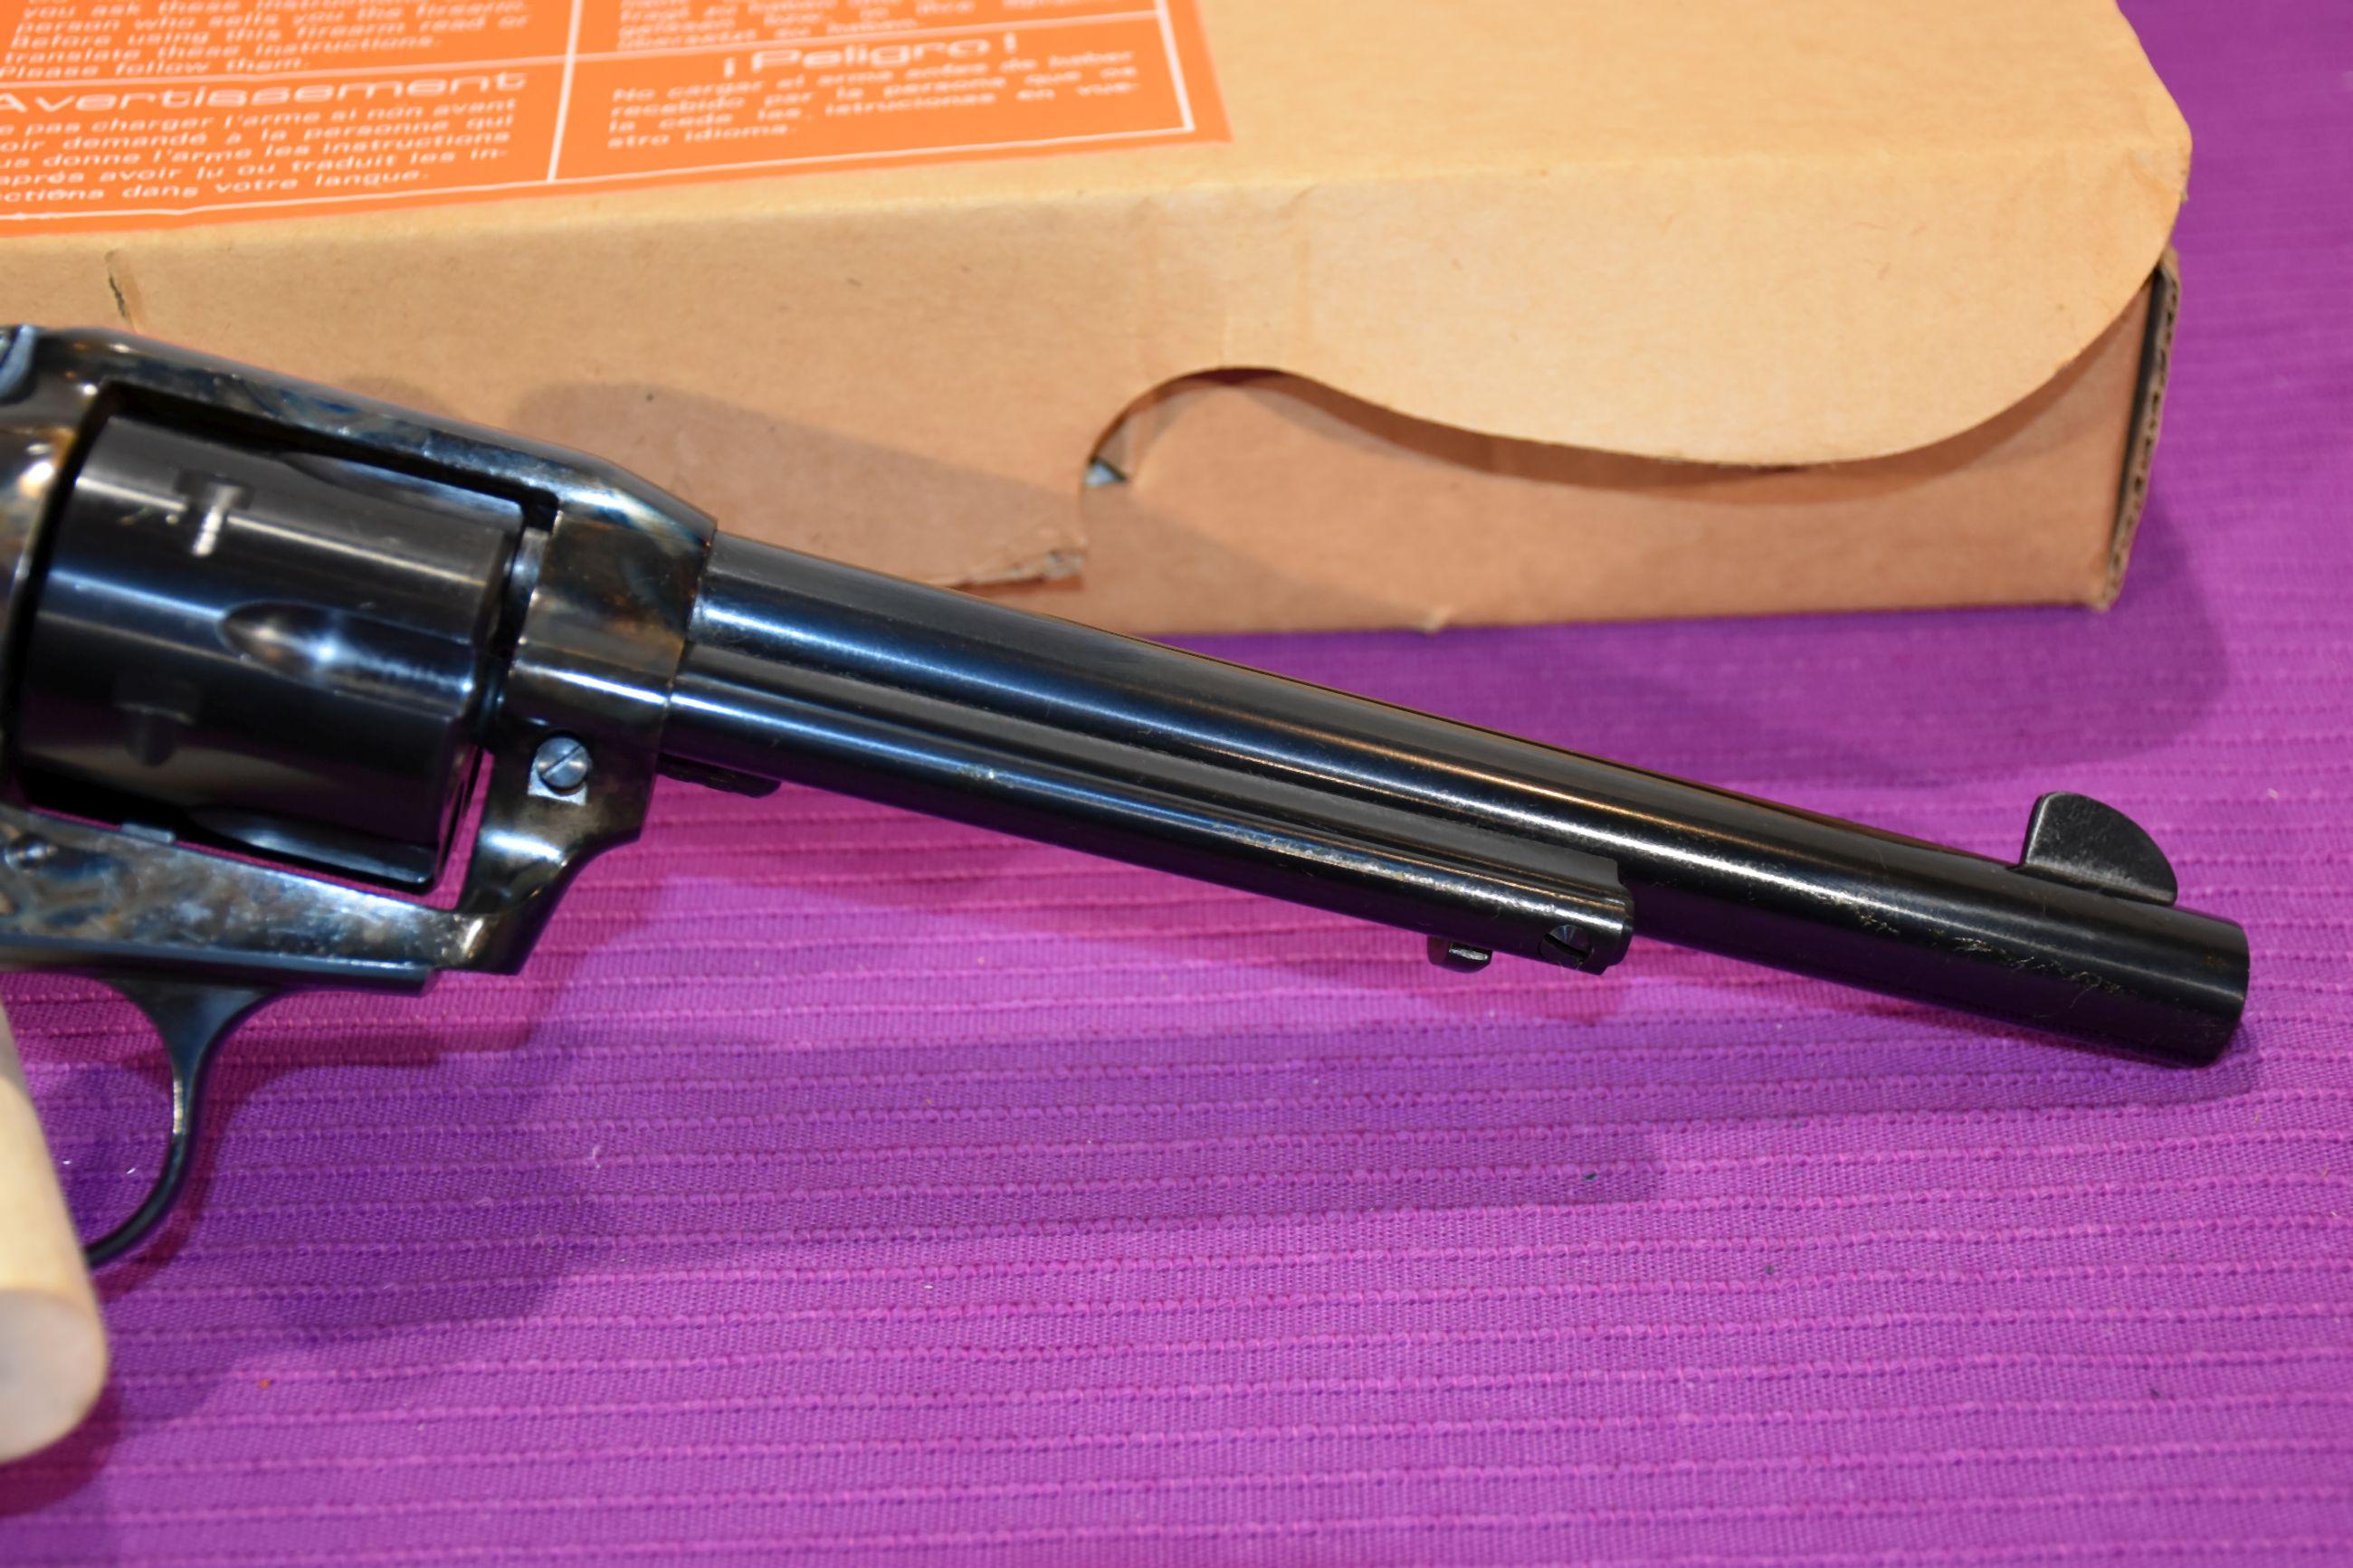 Dakota New Model Bisley Model 38-40 Cal, Blued With Case Coloring, 7.5" Barrel, SN: 1084, With Box